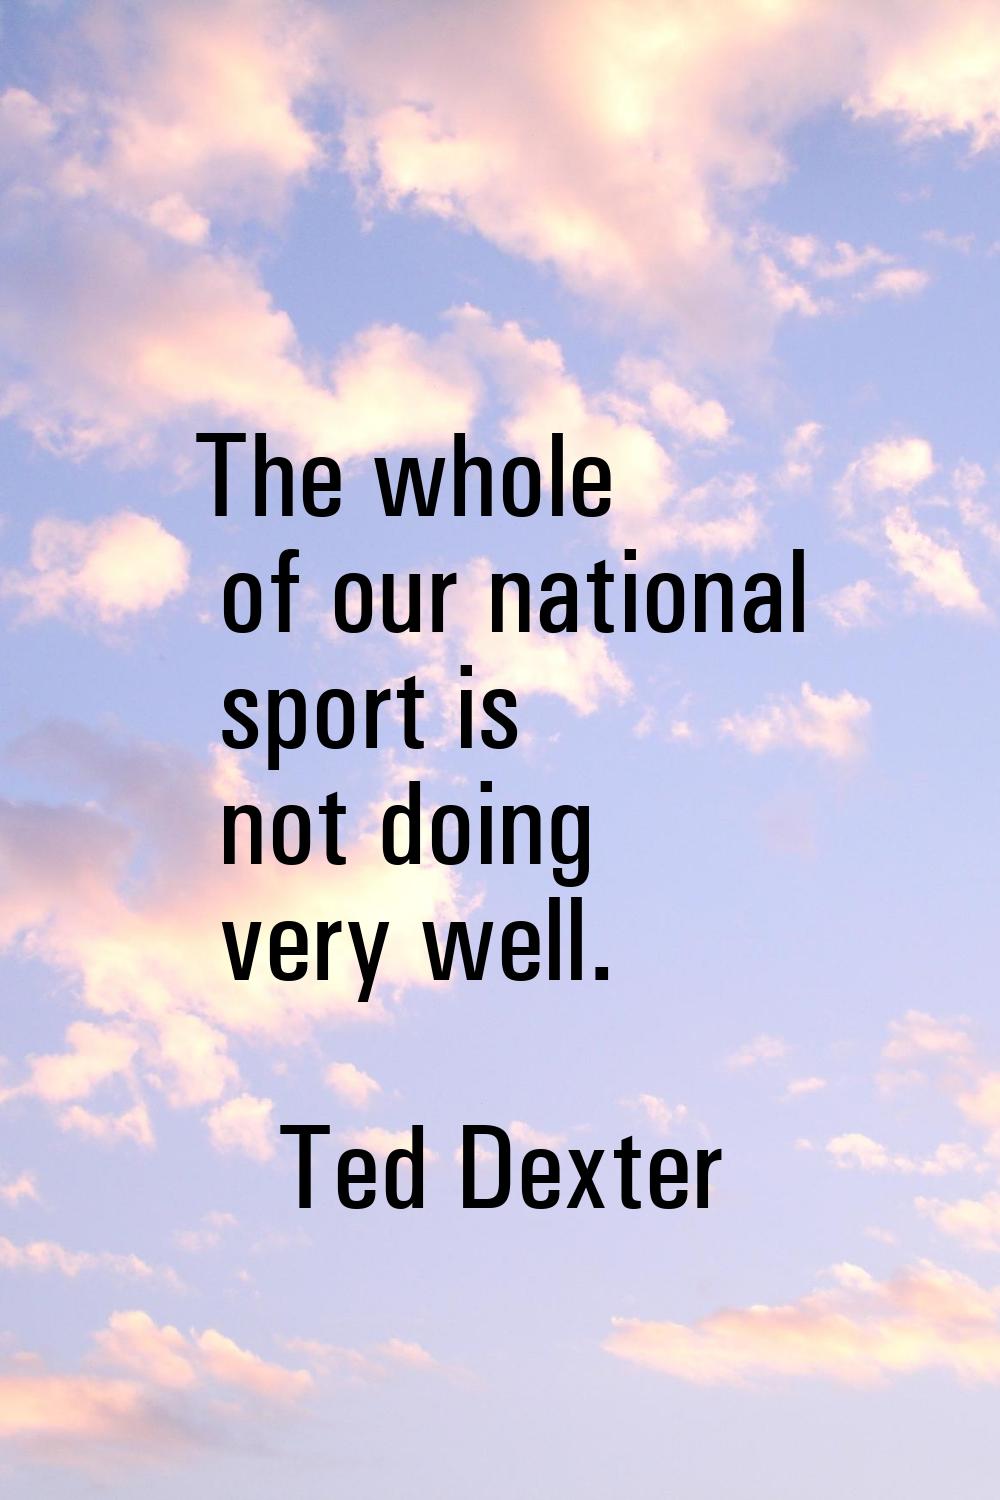 The whole of our national sport is not doing very well.